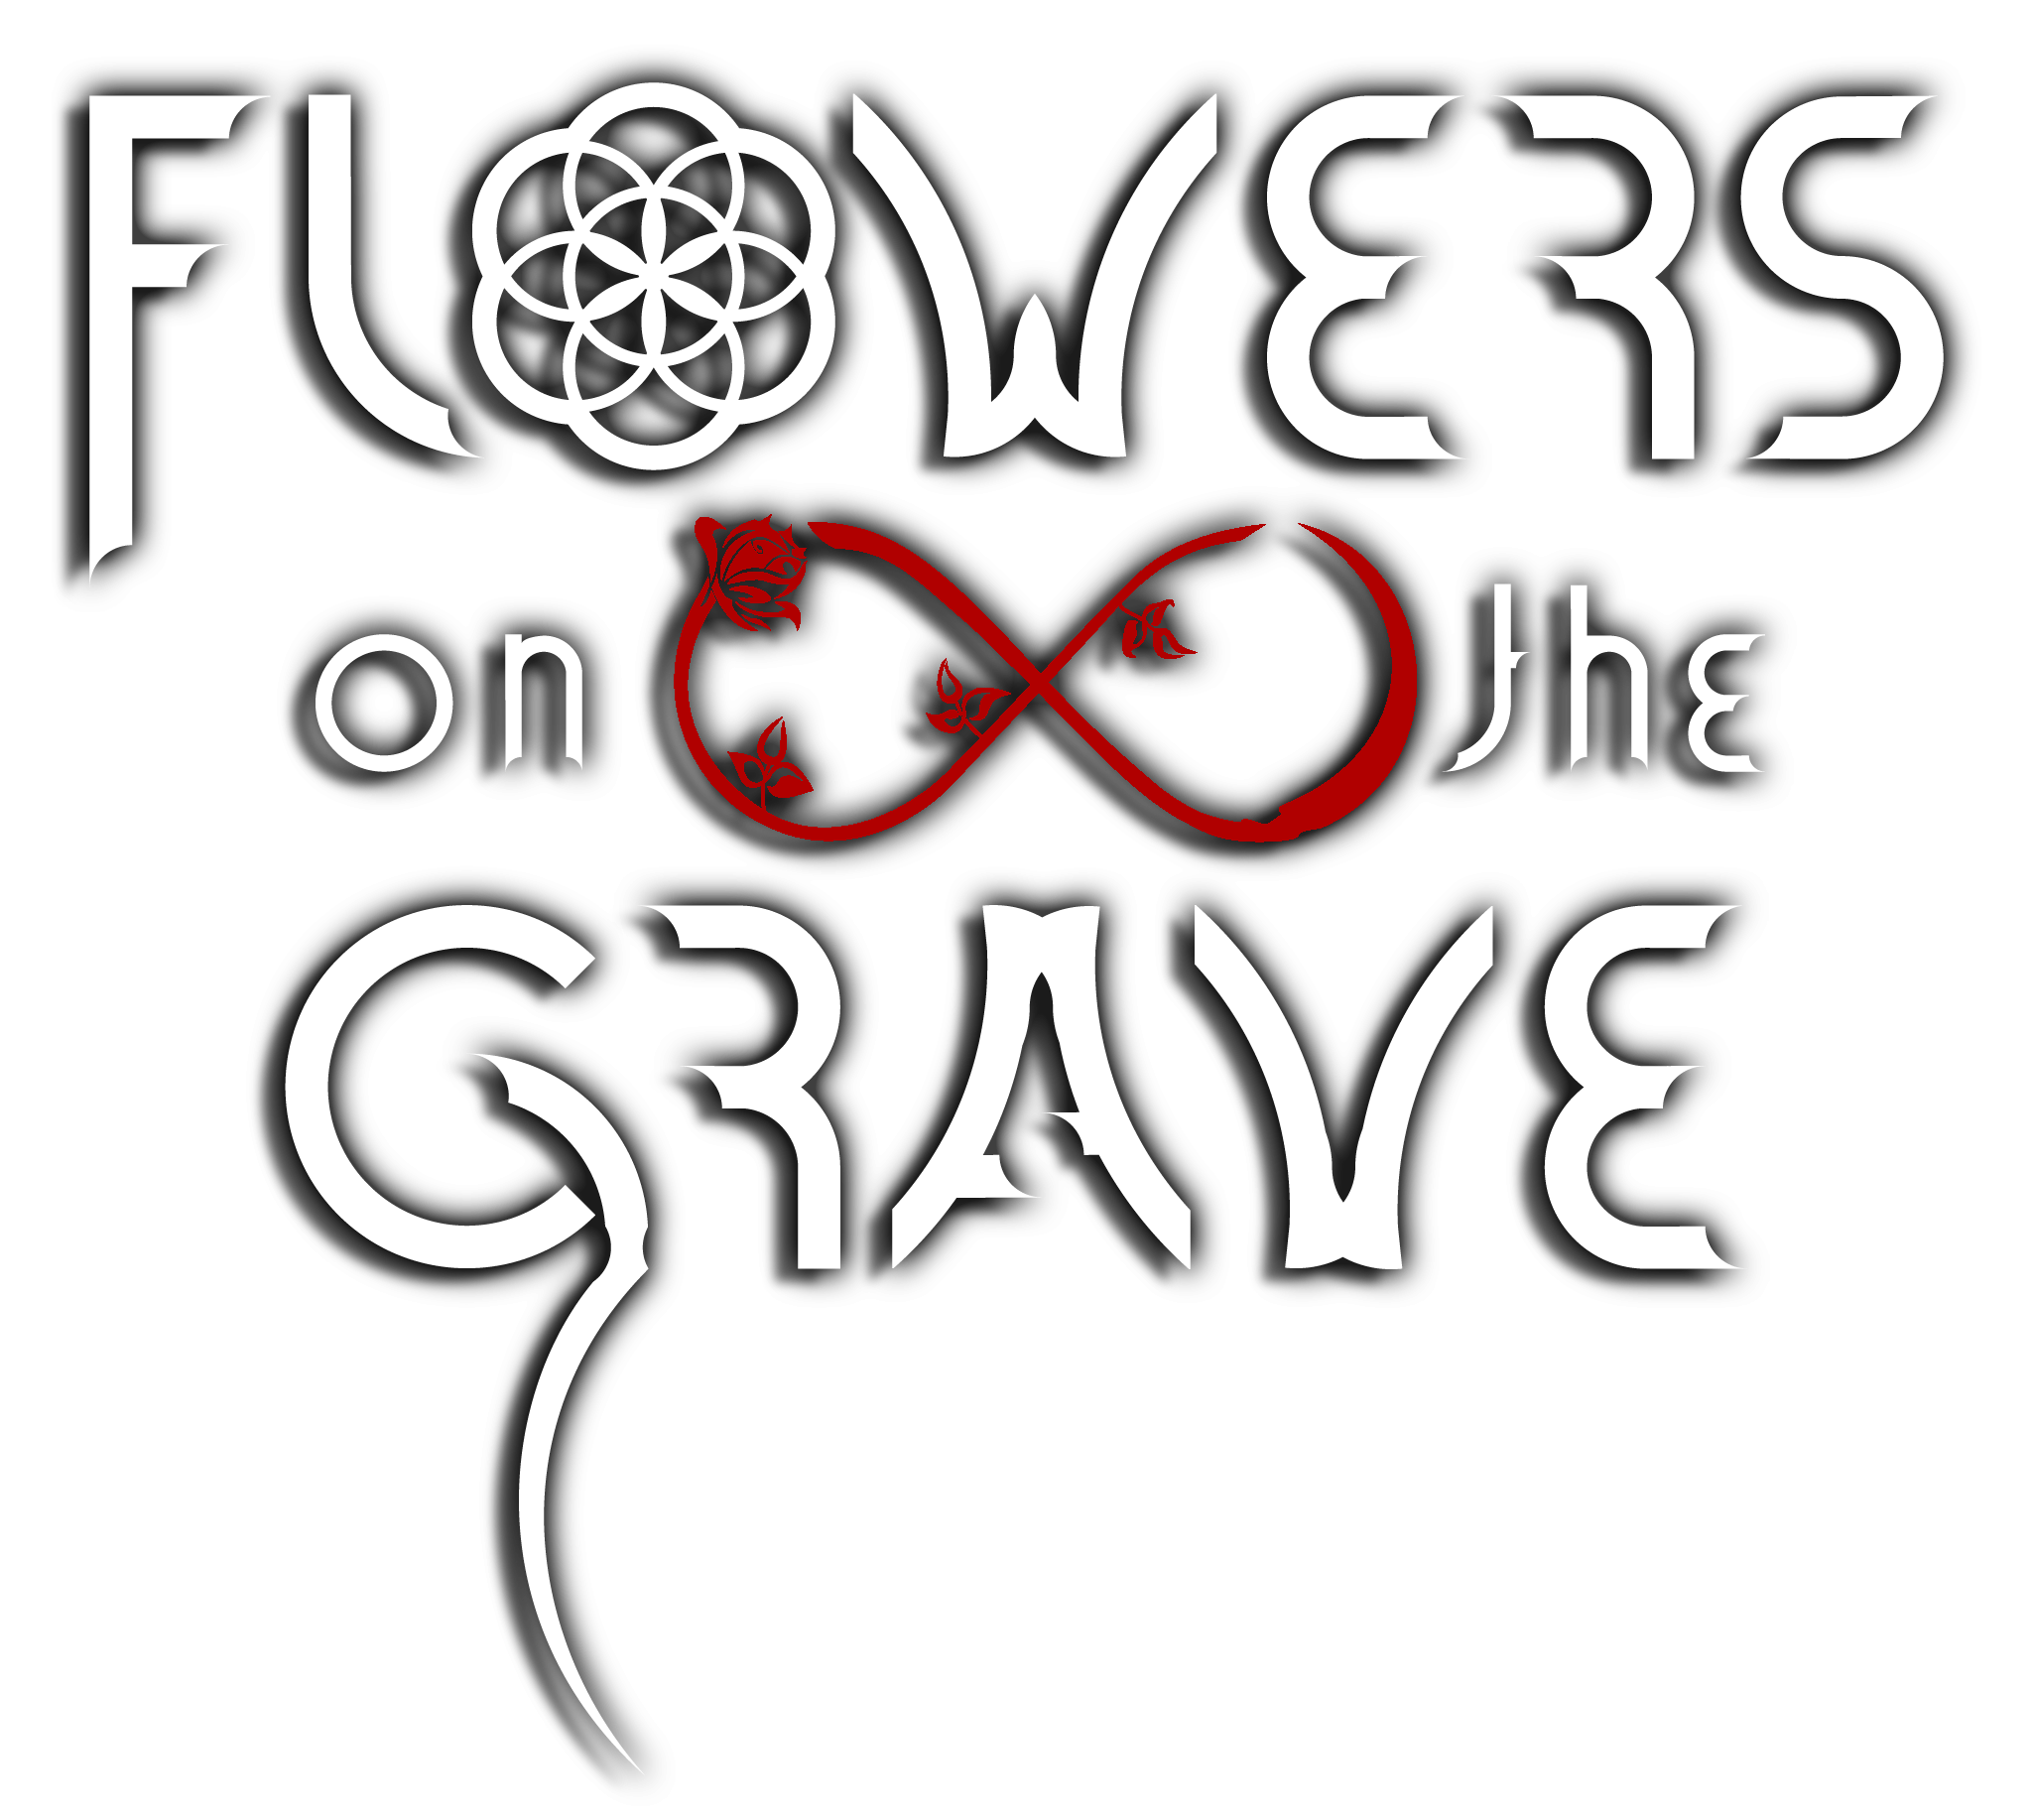 FLOWERS ON THE GRAVE